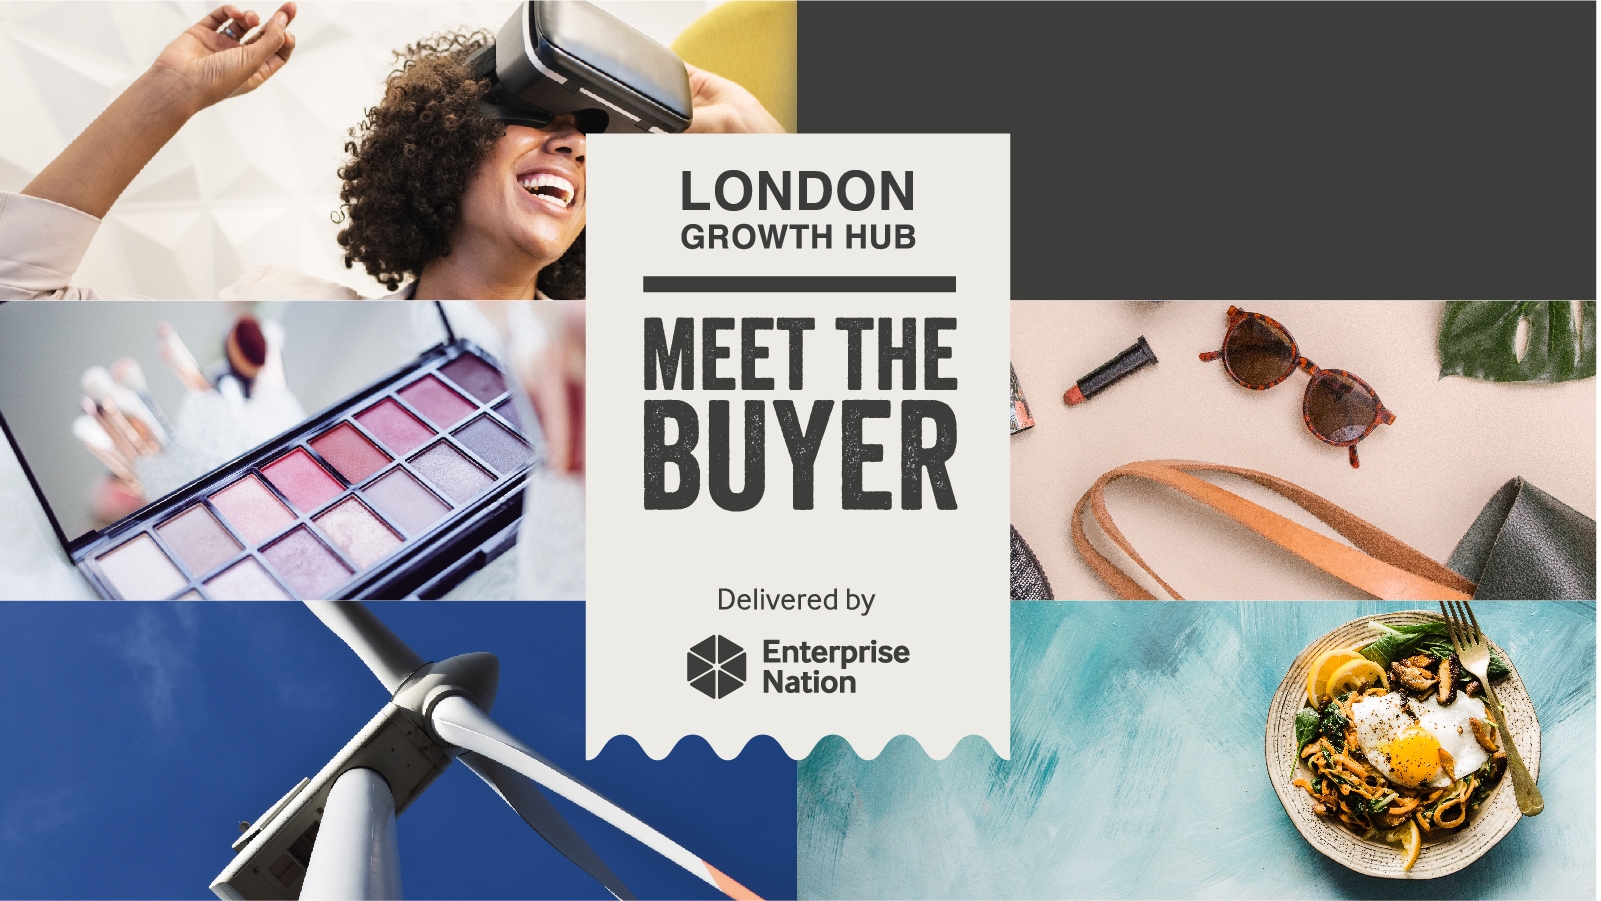 Hundreds of London businesses set to benefit from Growth Hub Meet the Buyer events